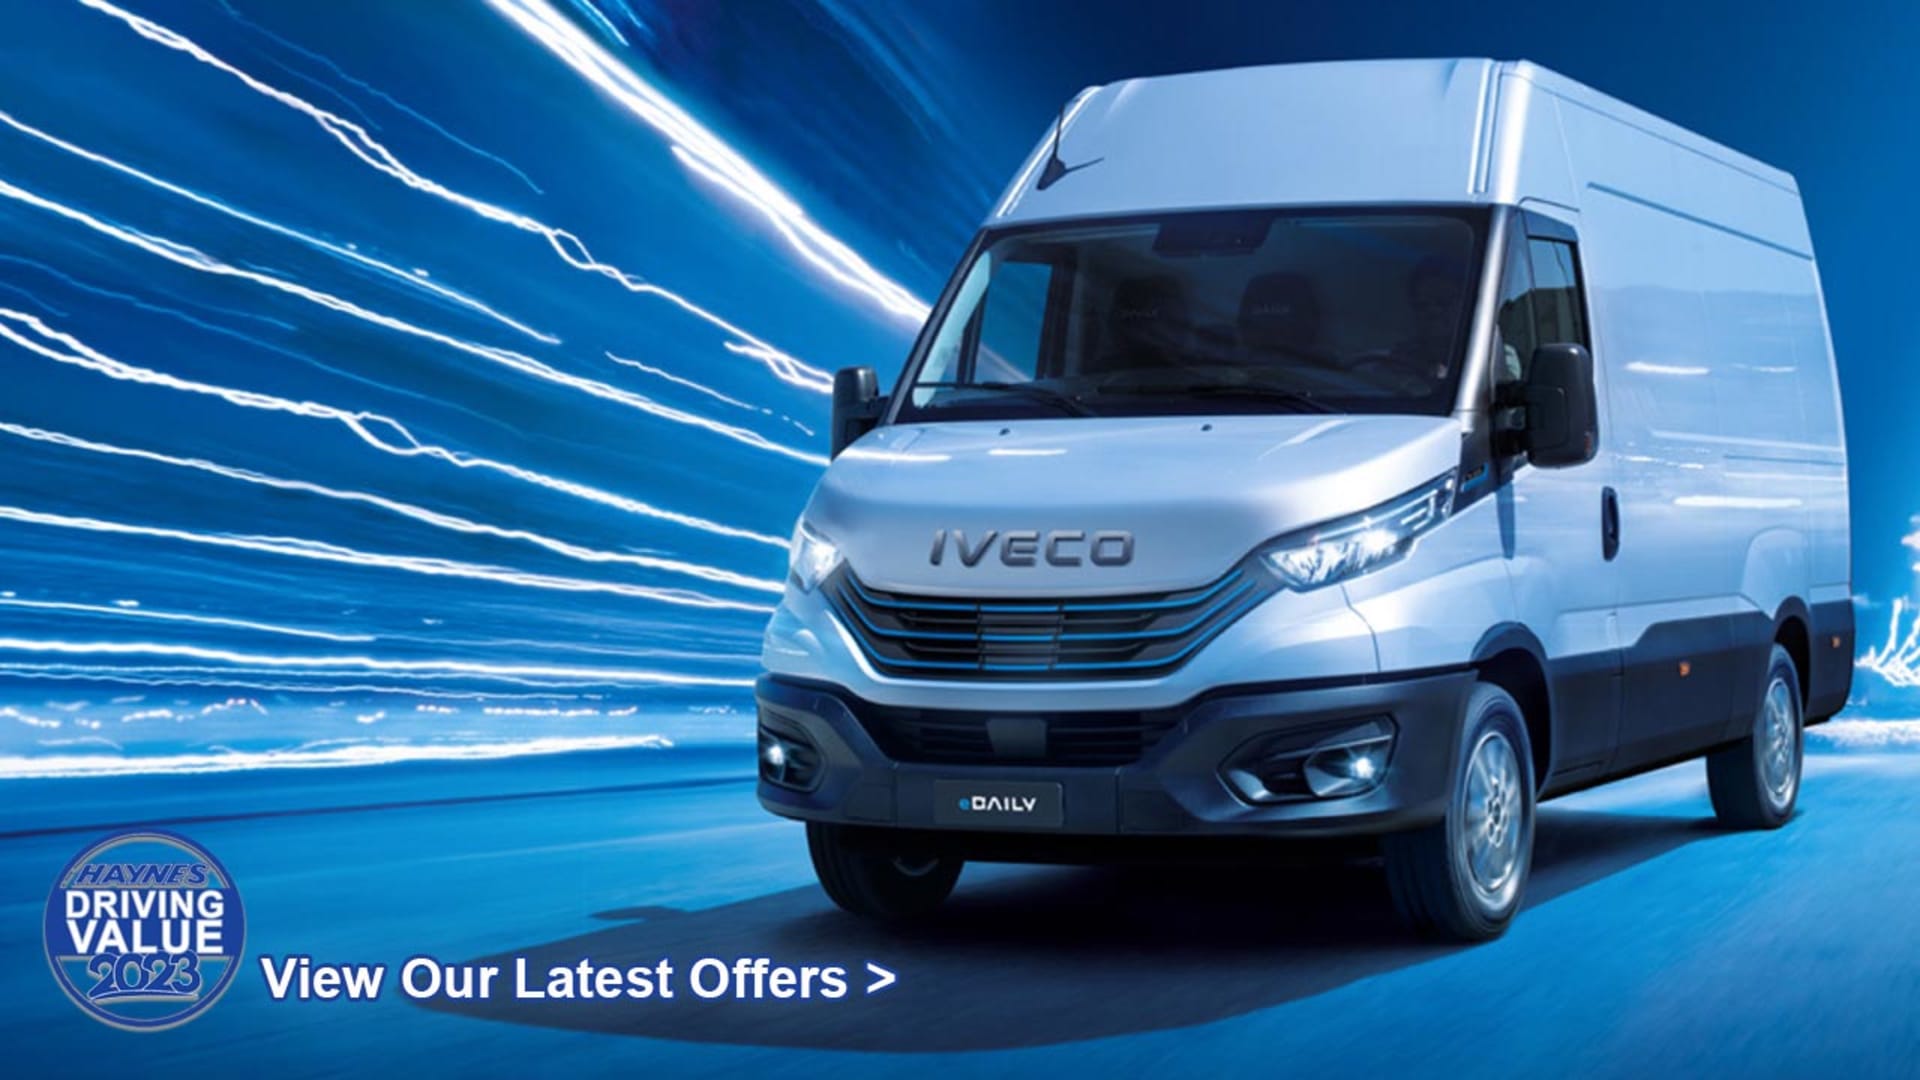 Iveco Offers